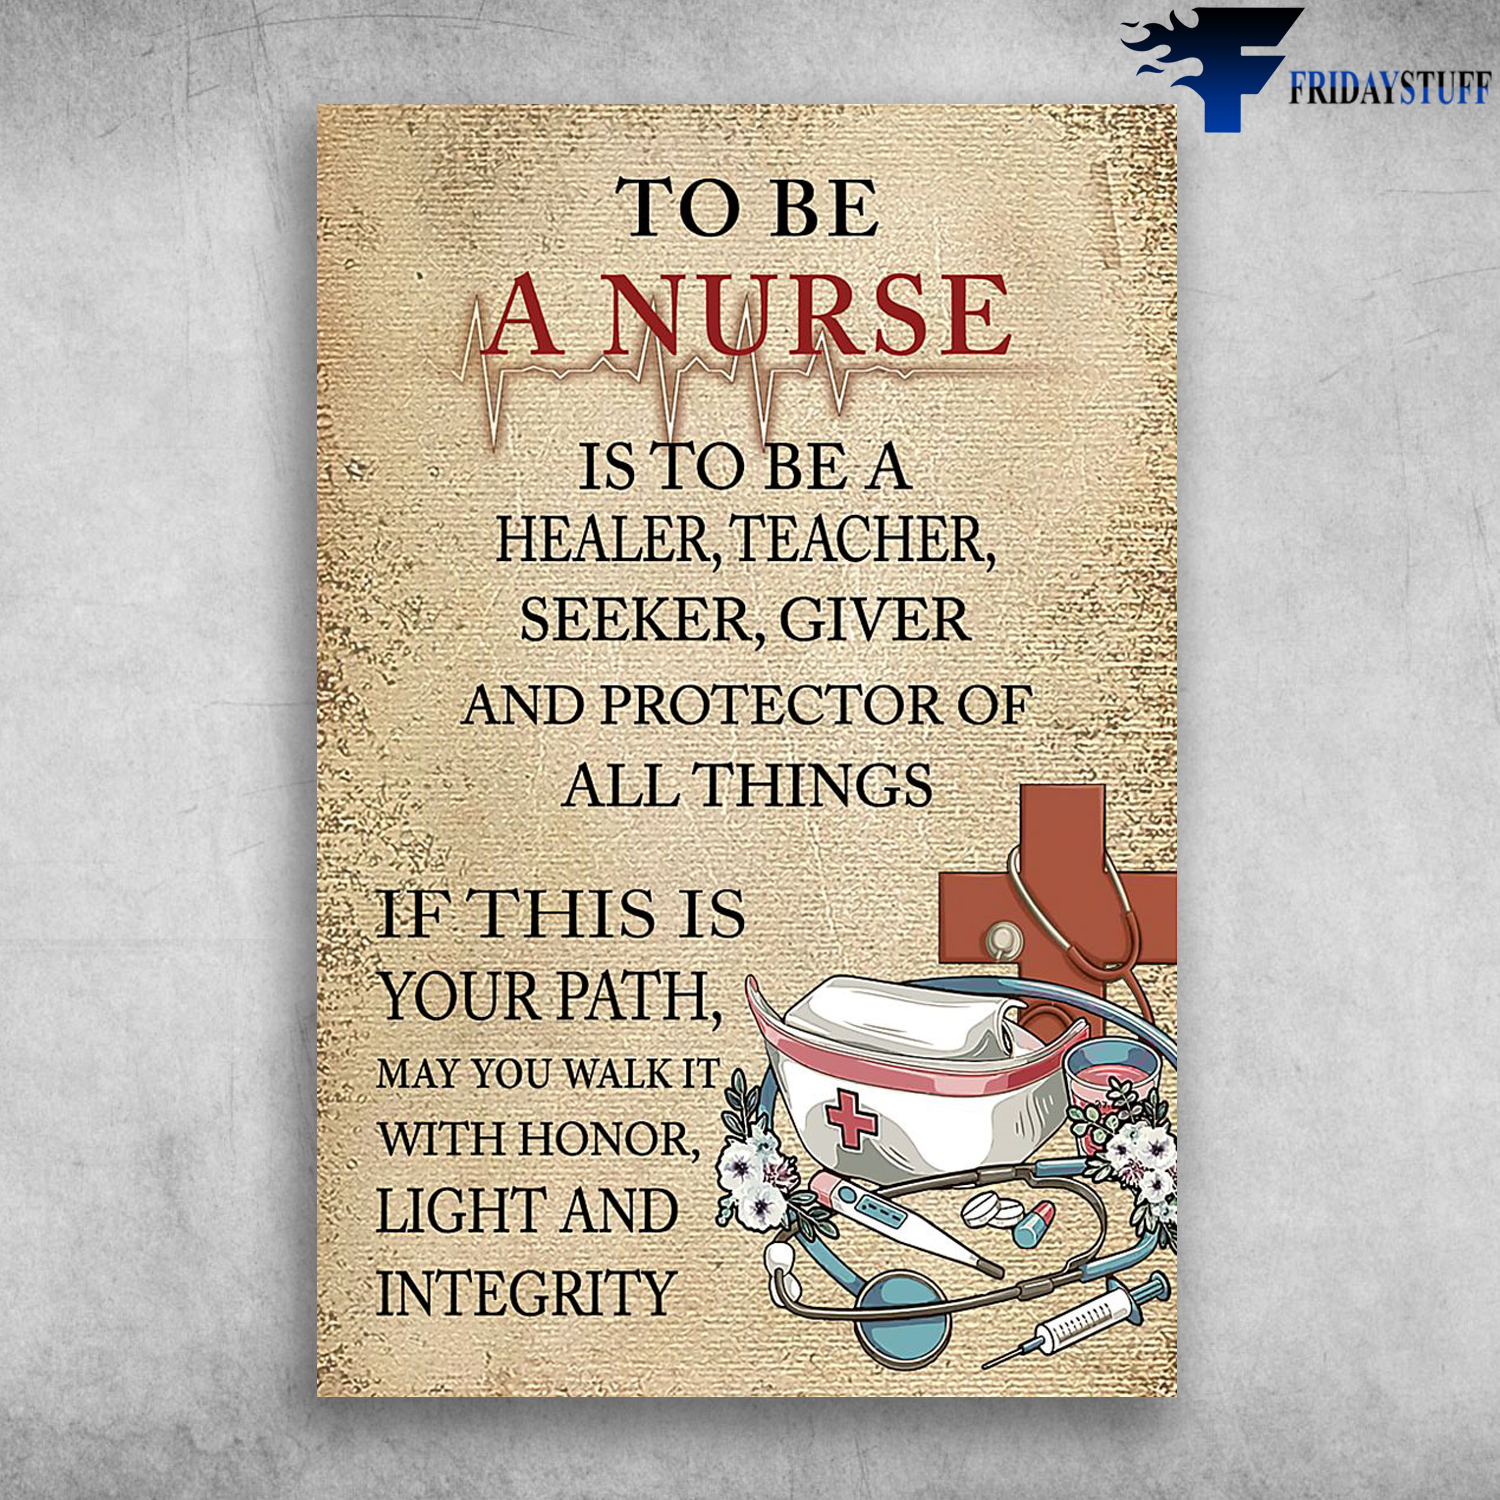 To Be A Nurse Is To Be A Healer, Teacher, Seeker, Giver And Protector Of All Things